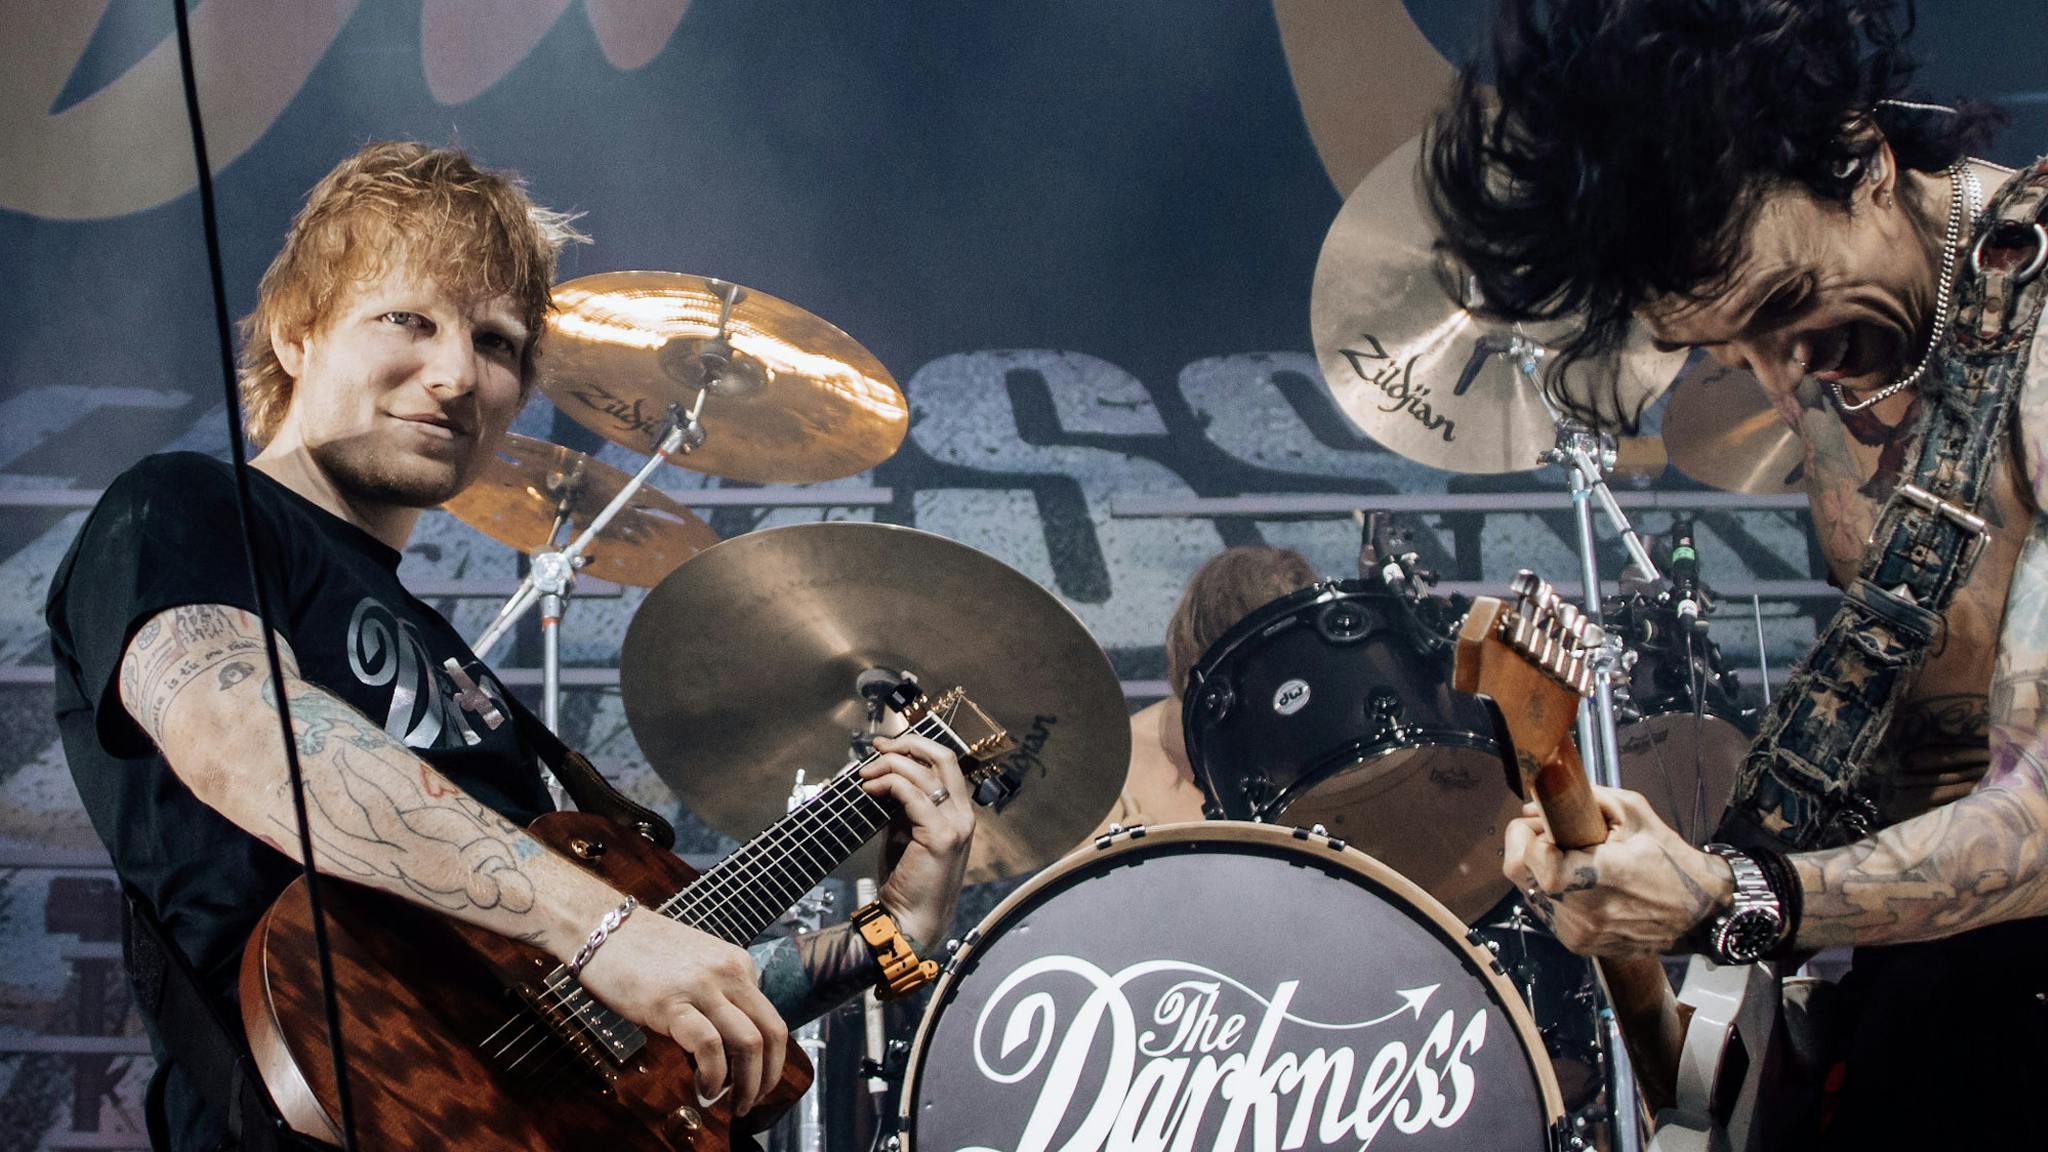 Ed Sheeran played a surprise support slot for The Darkness before joining them onstage